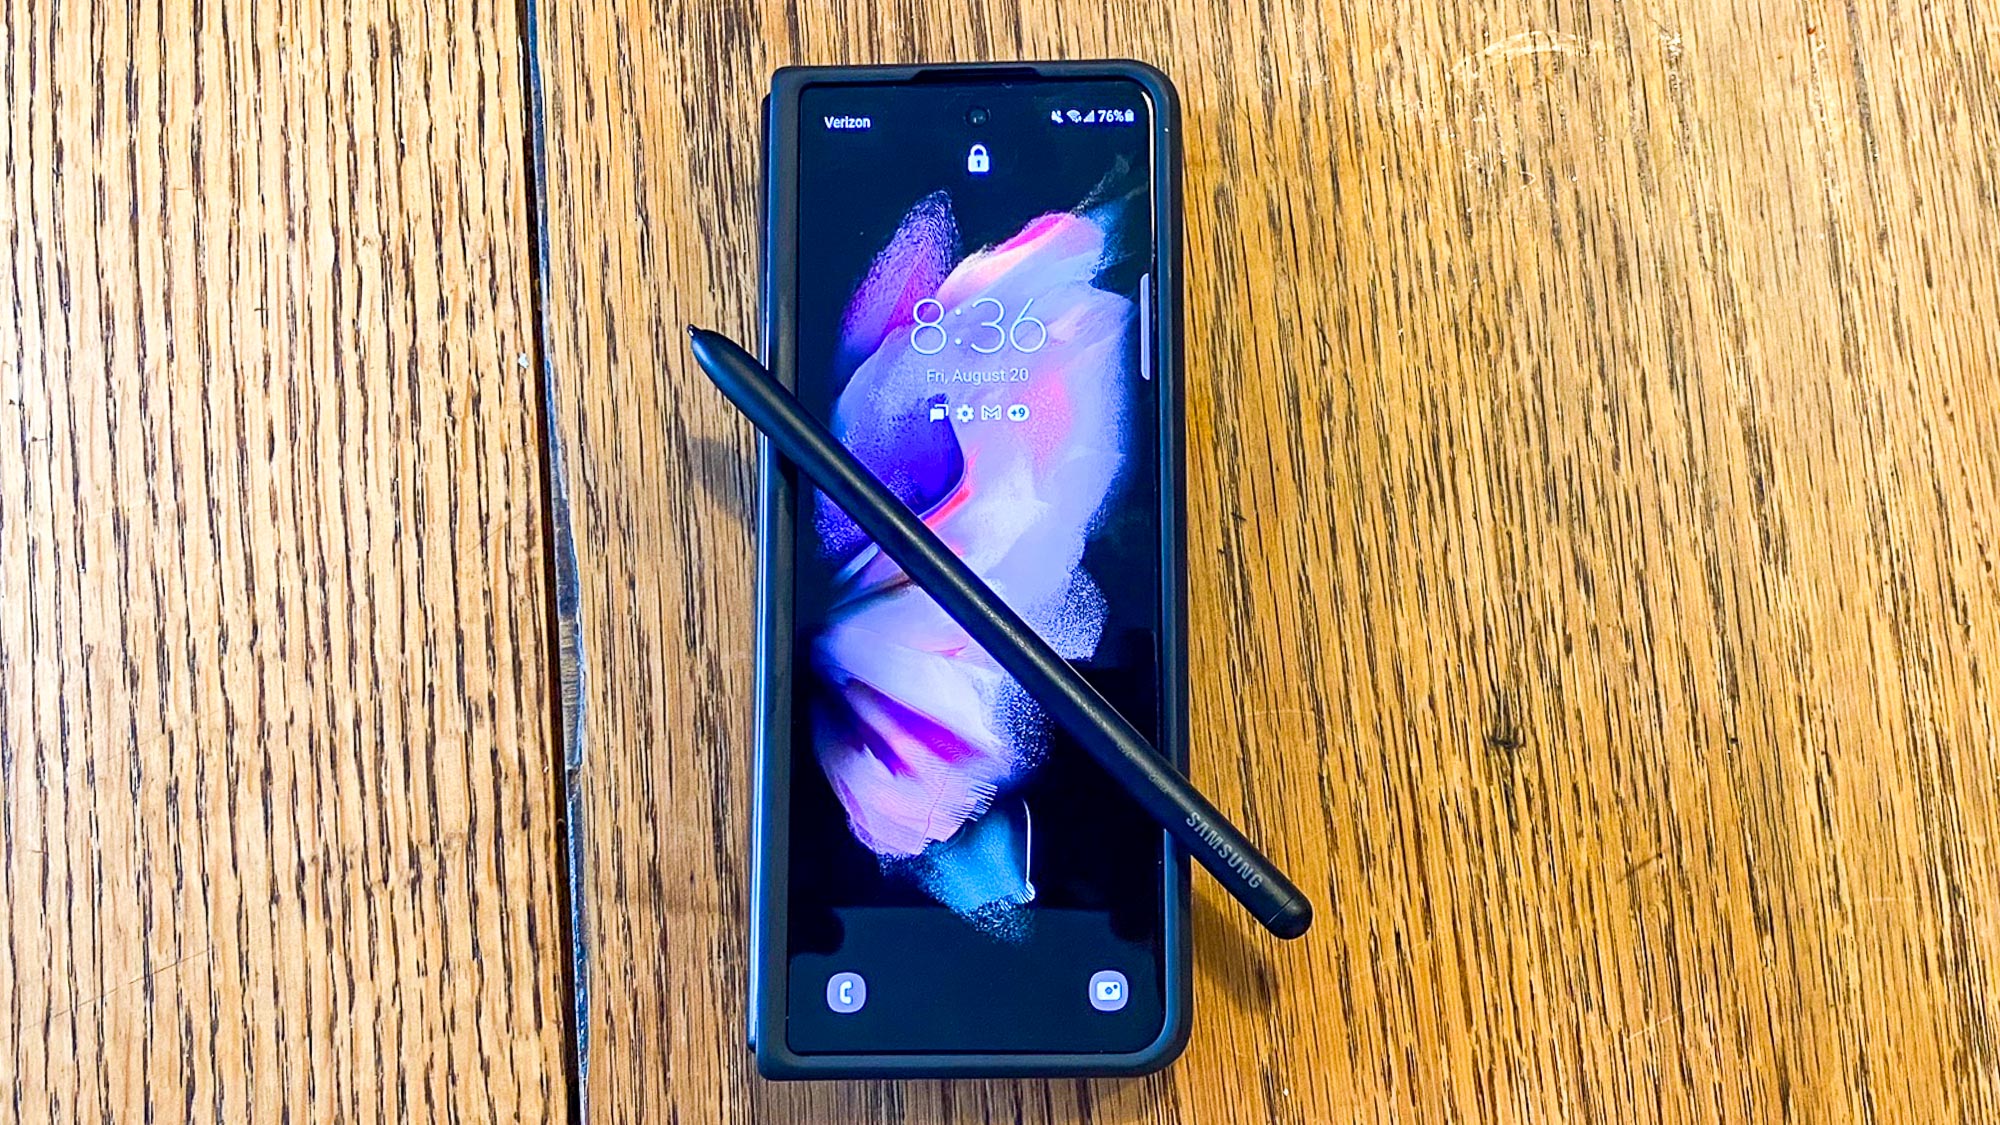 Galaxy Z Fold 3 and S Pen